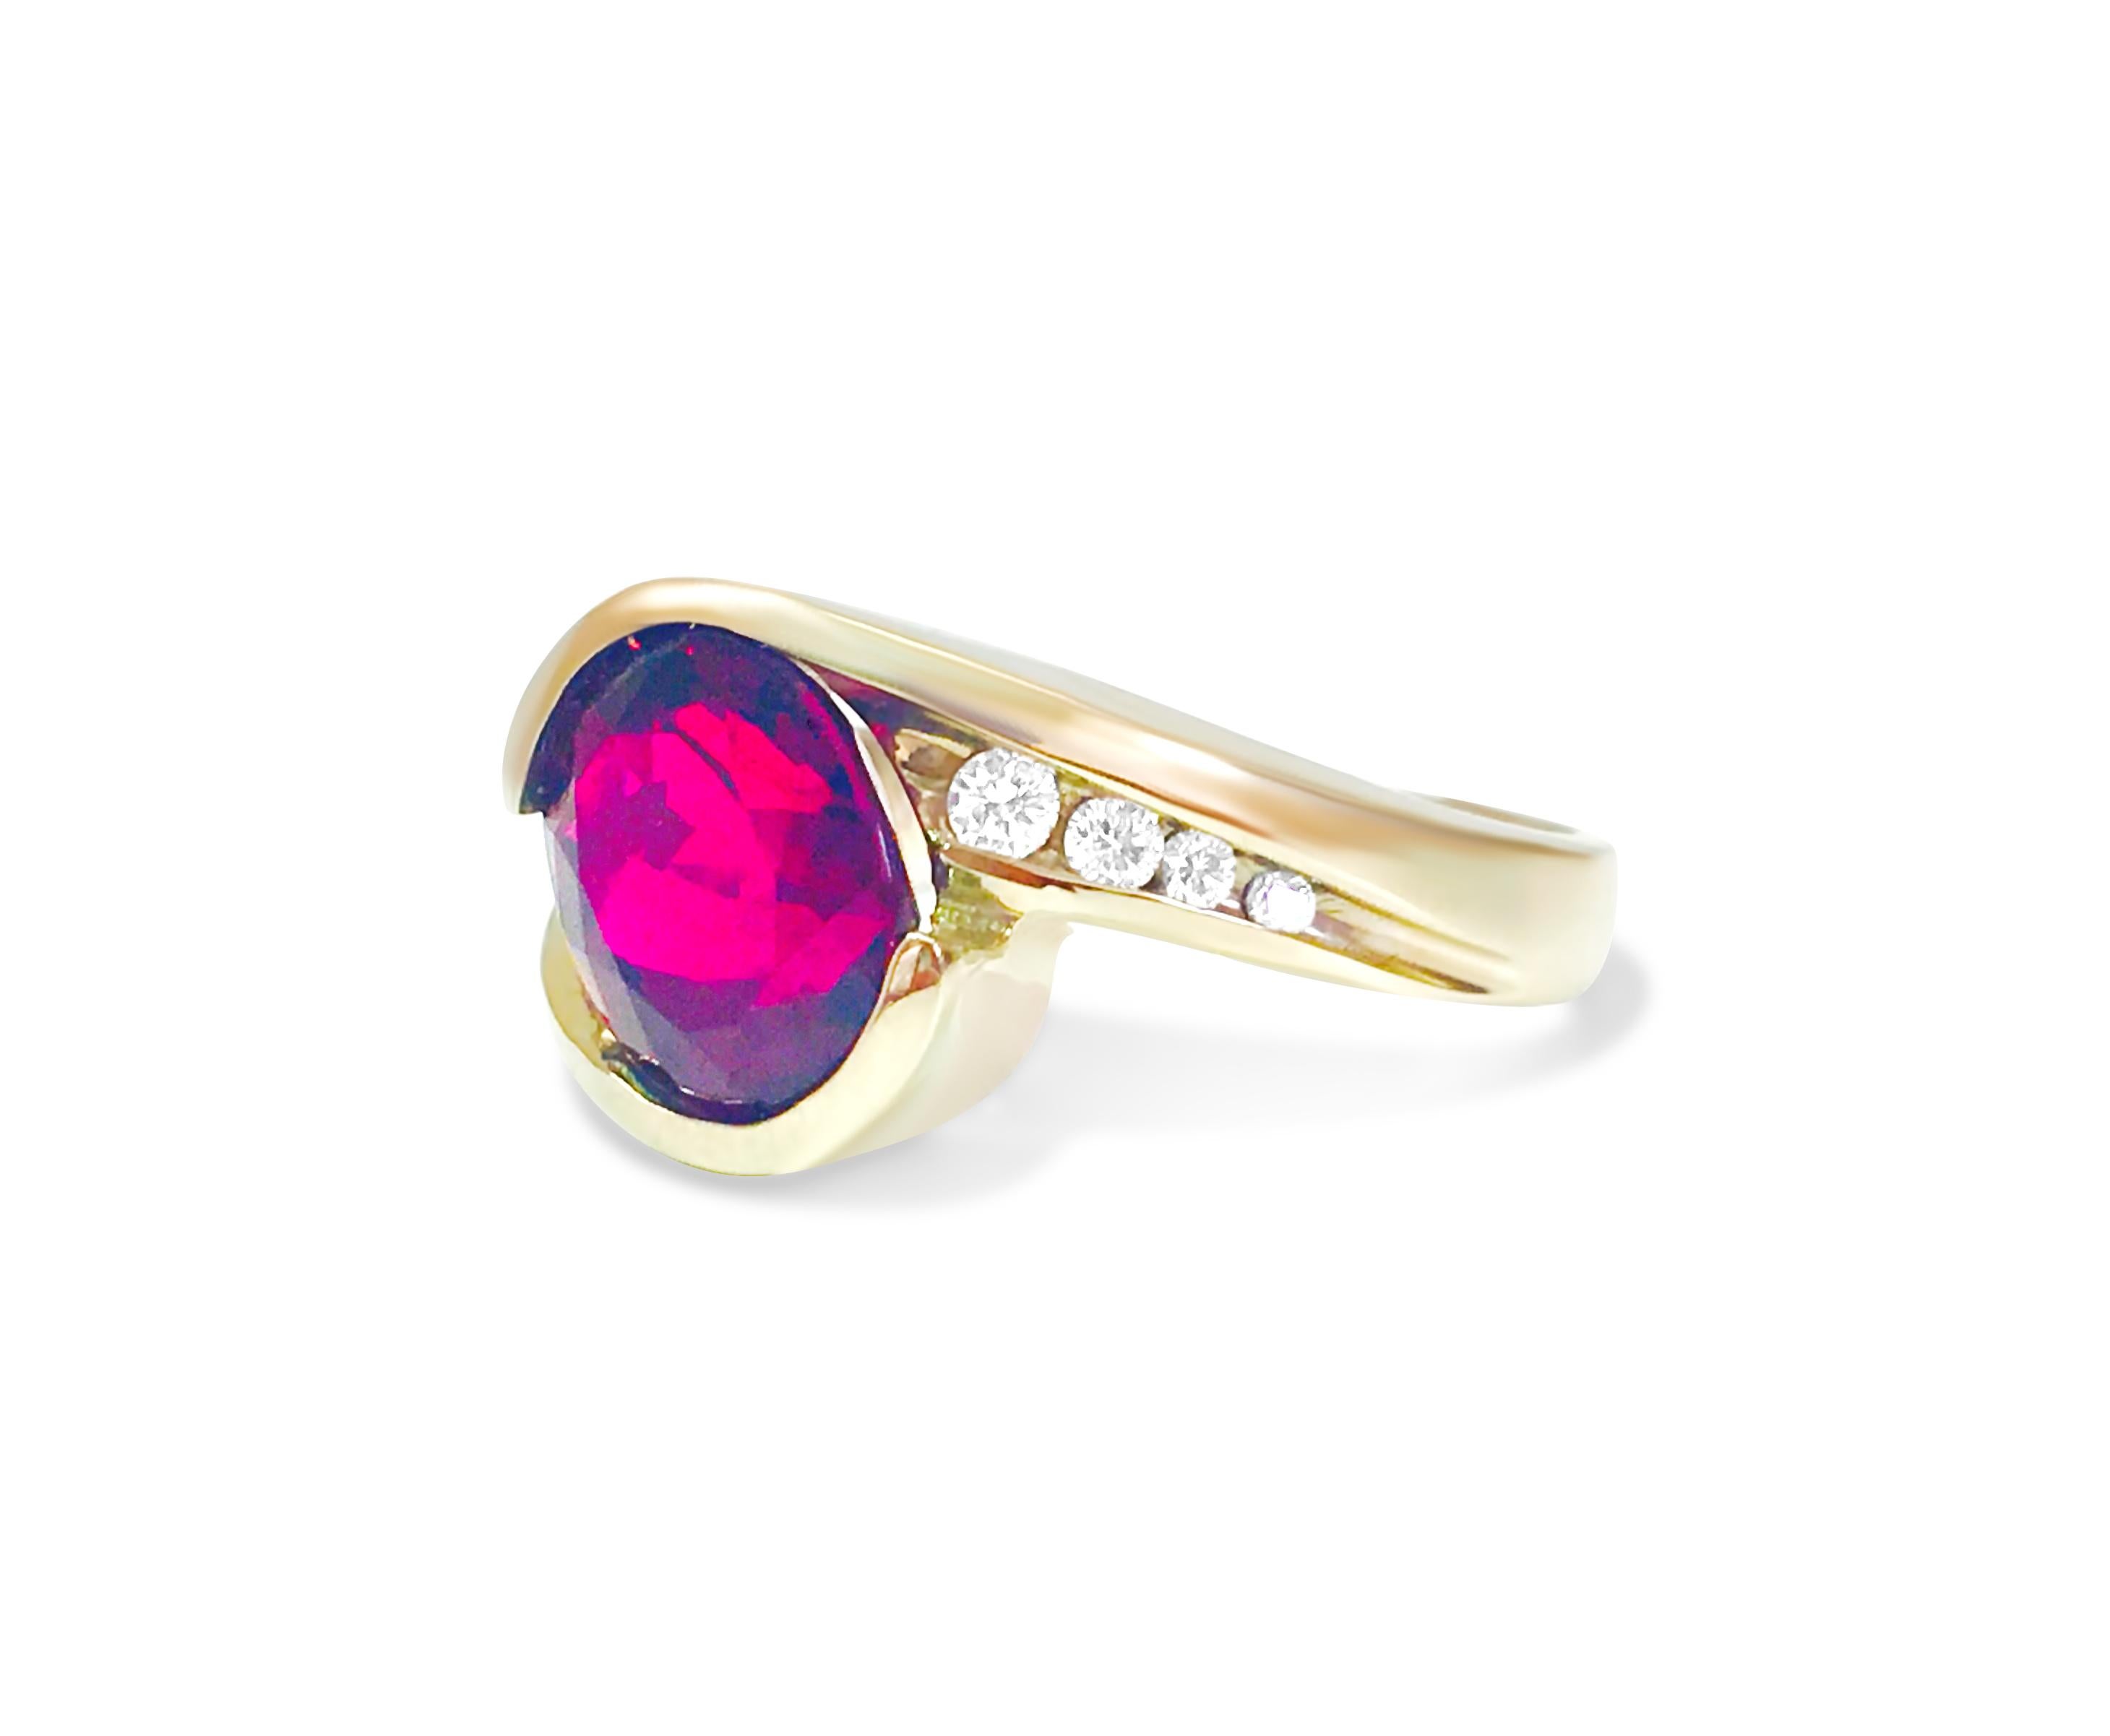 A ring made of 14k white gold with a beautiful oval-shaped rubellite gemstone and shiny round white diamonds. The rubellite is carefully cut, and the diamonds sparkle brightly.

Elevate your style with our 14k White Gold Rubelite & Diamond Ring, a